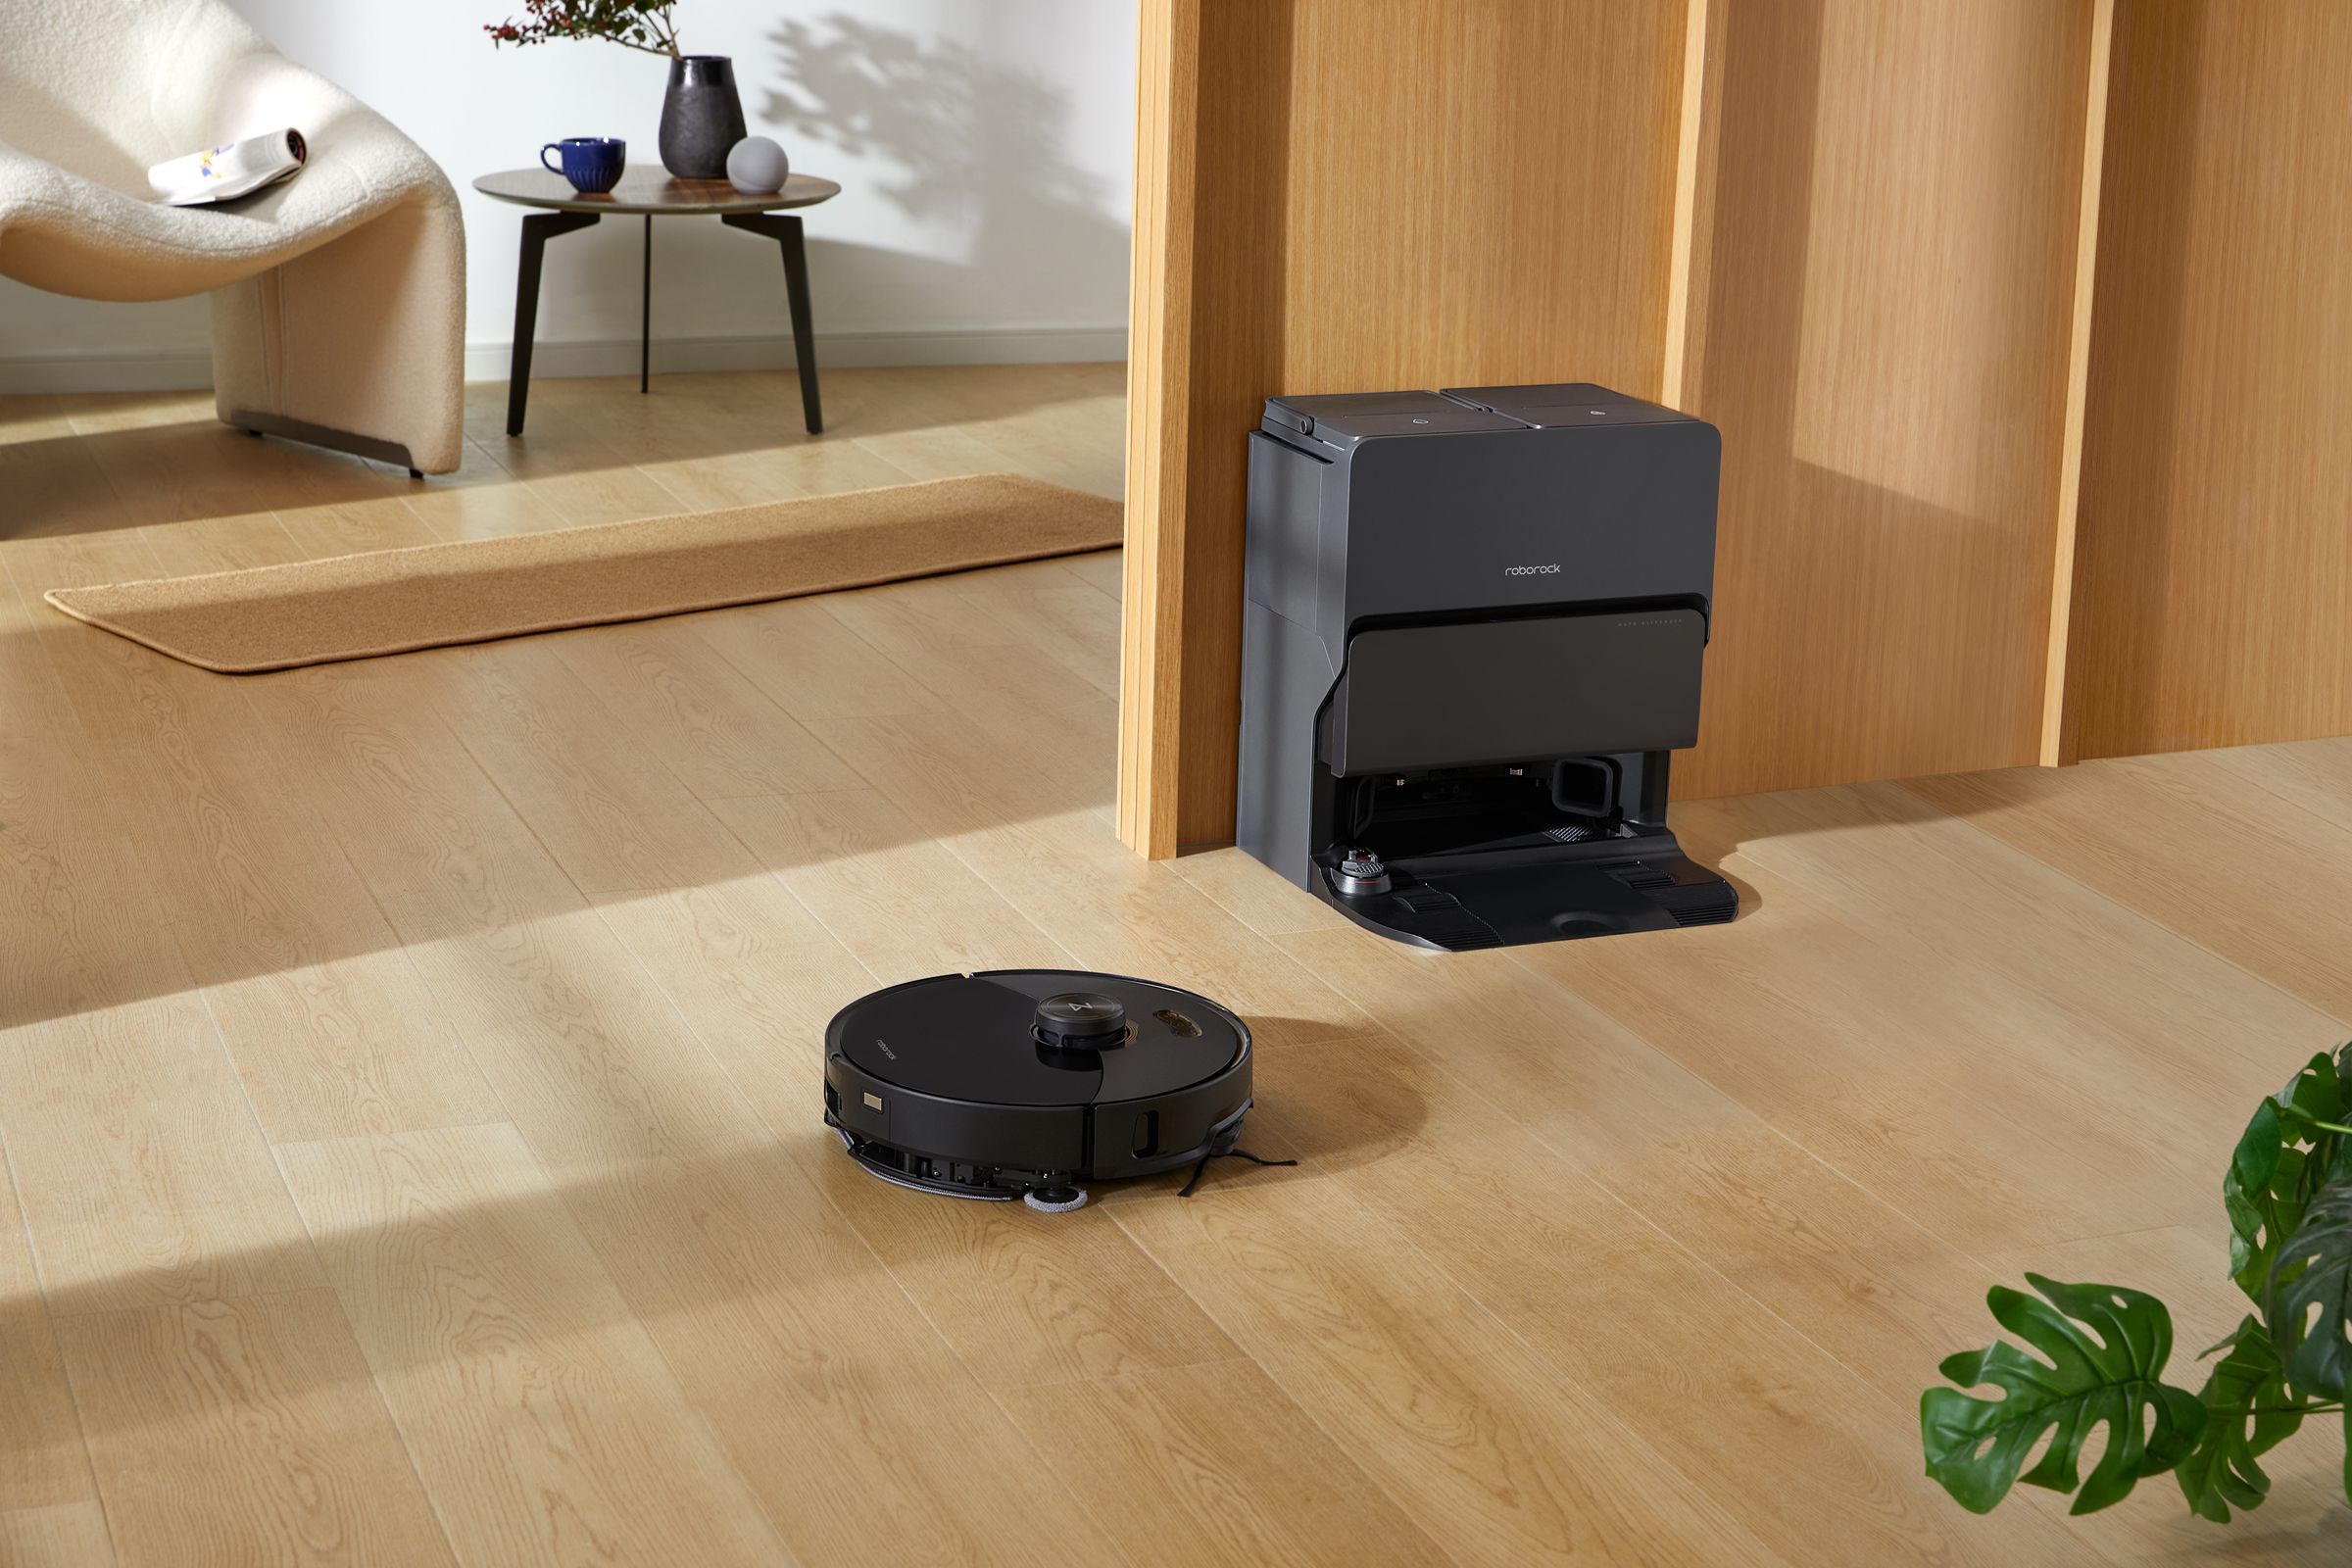 A black robot on a wood floor heading to a black charging base by a door.